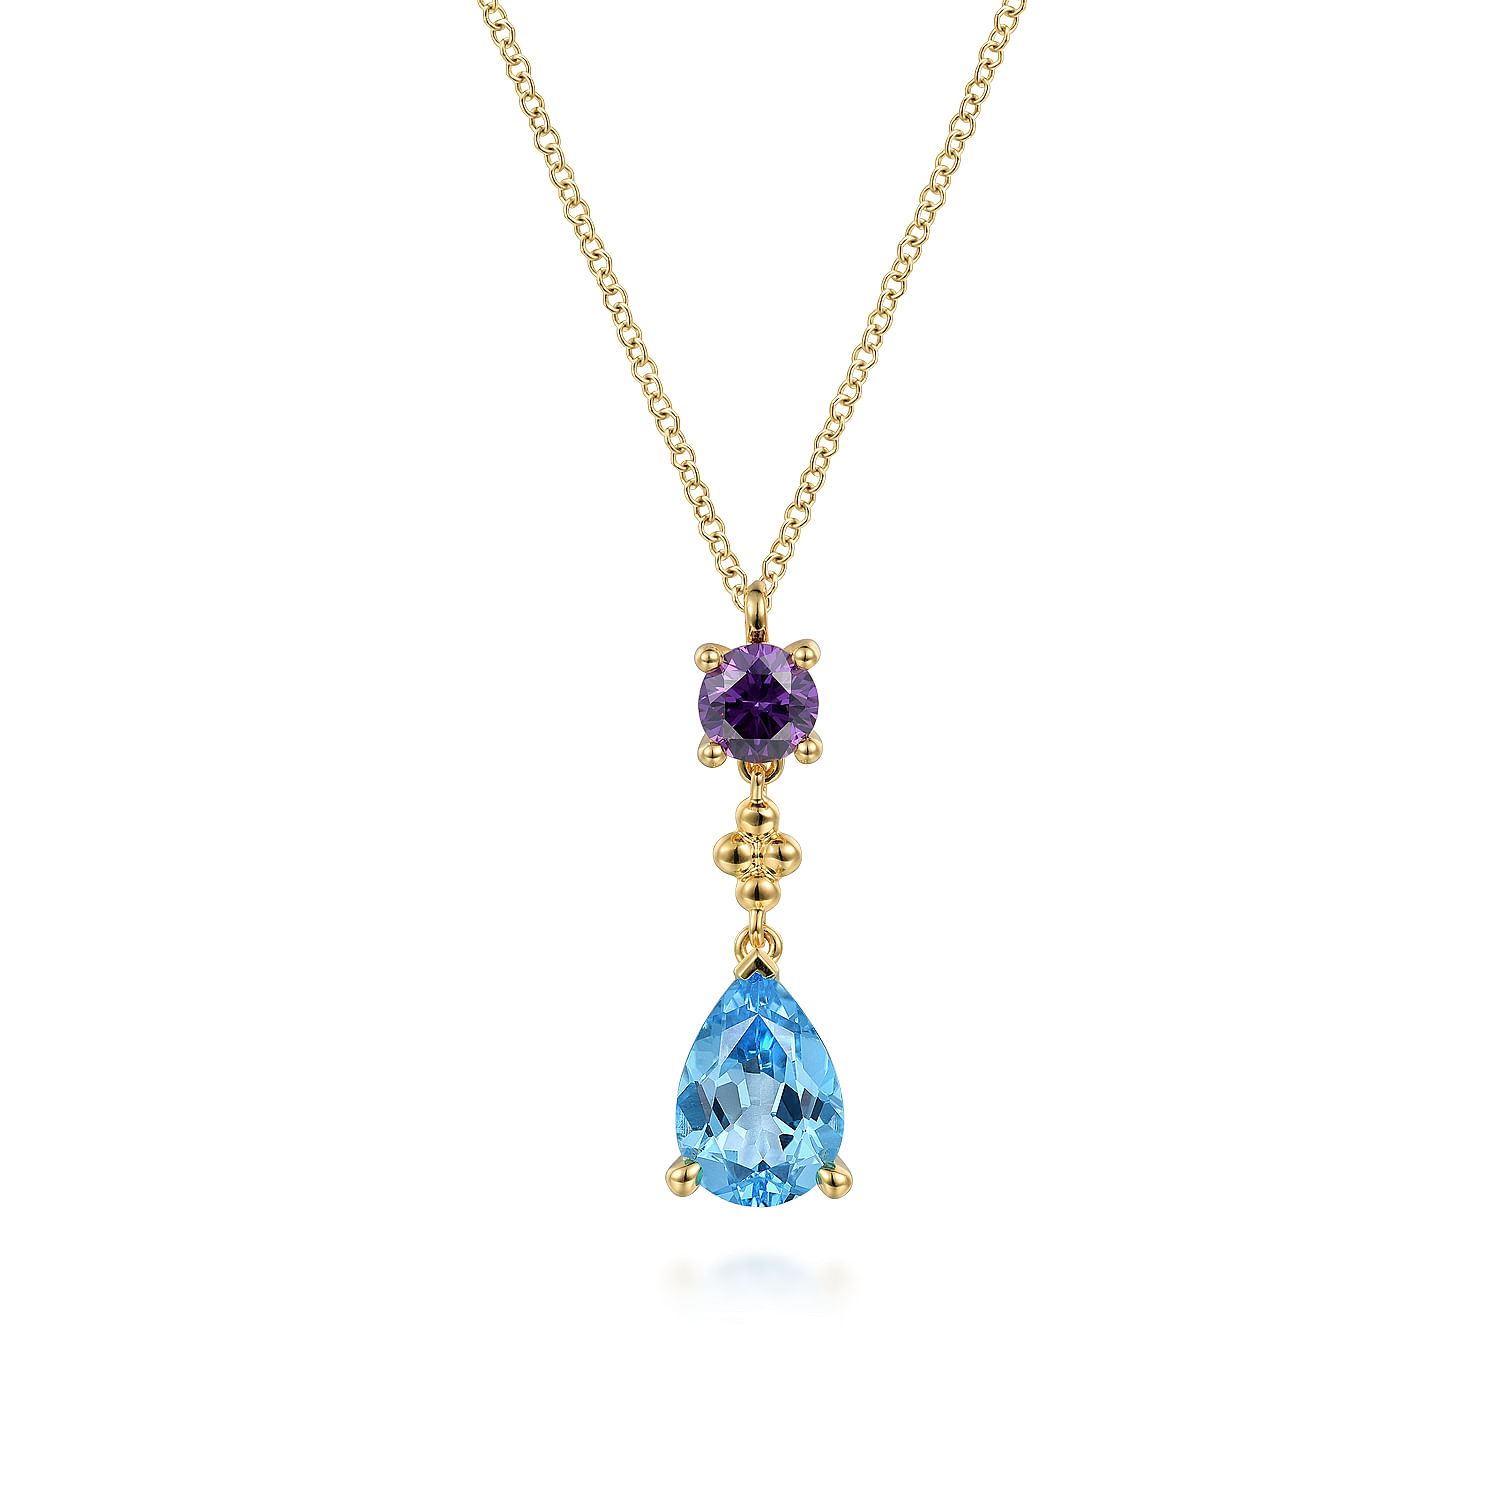 14K Yellow Gold Amethyst and Blue Topaz Pendant Drop Necklace